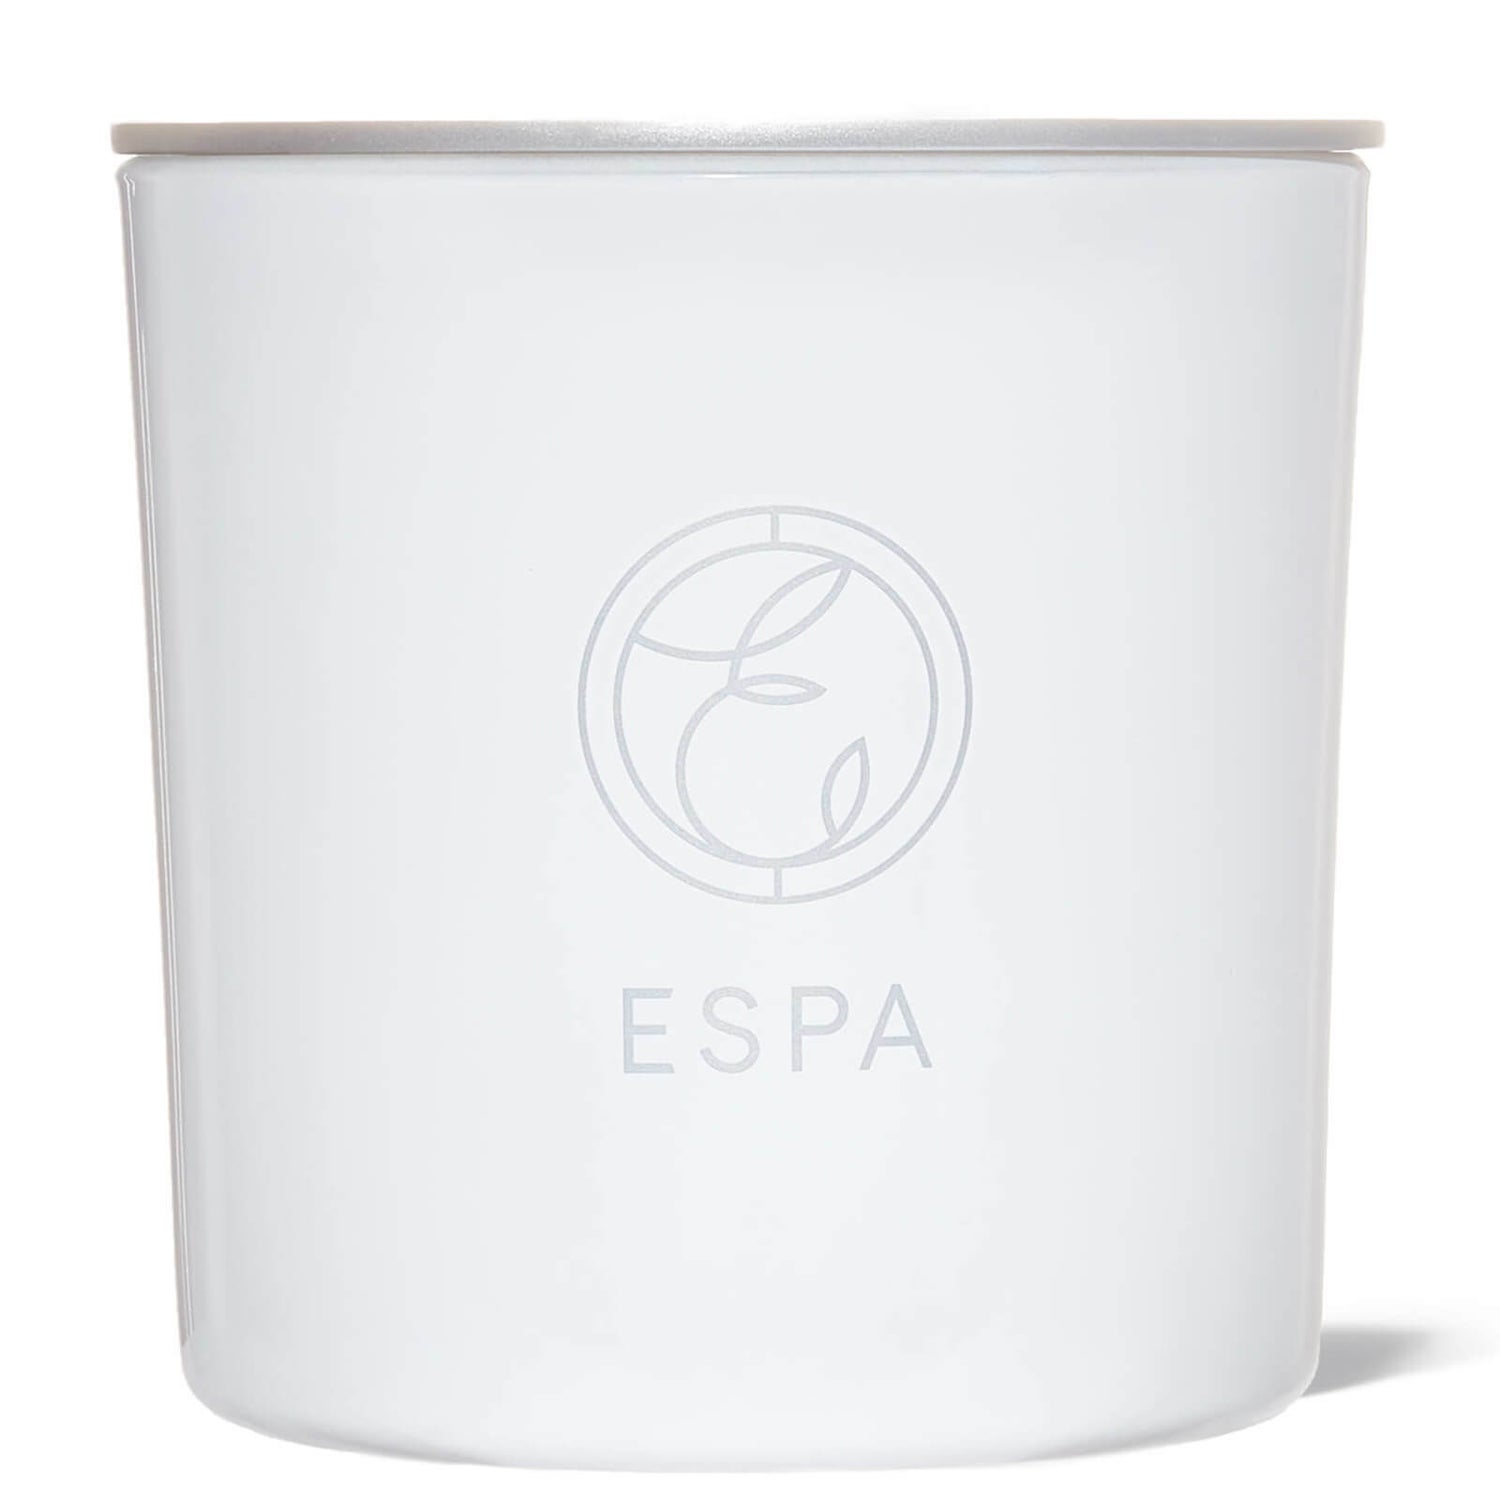 ESPA Soothing Candle 1kg